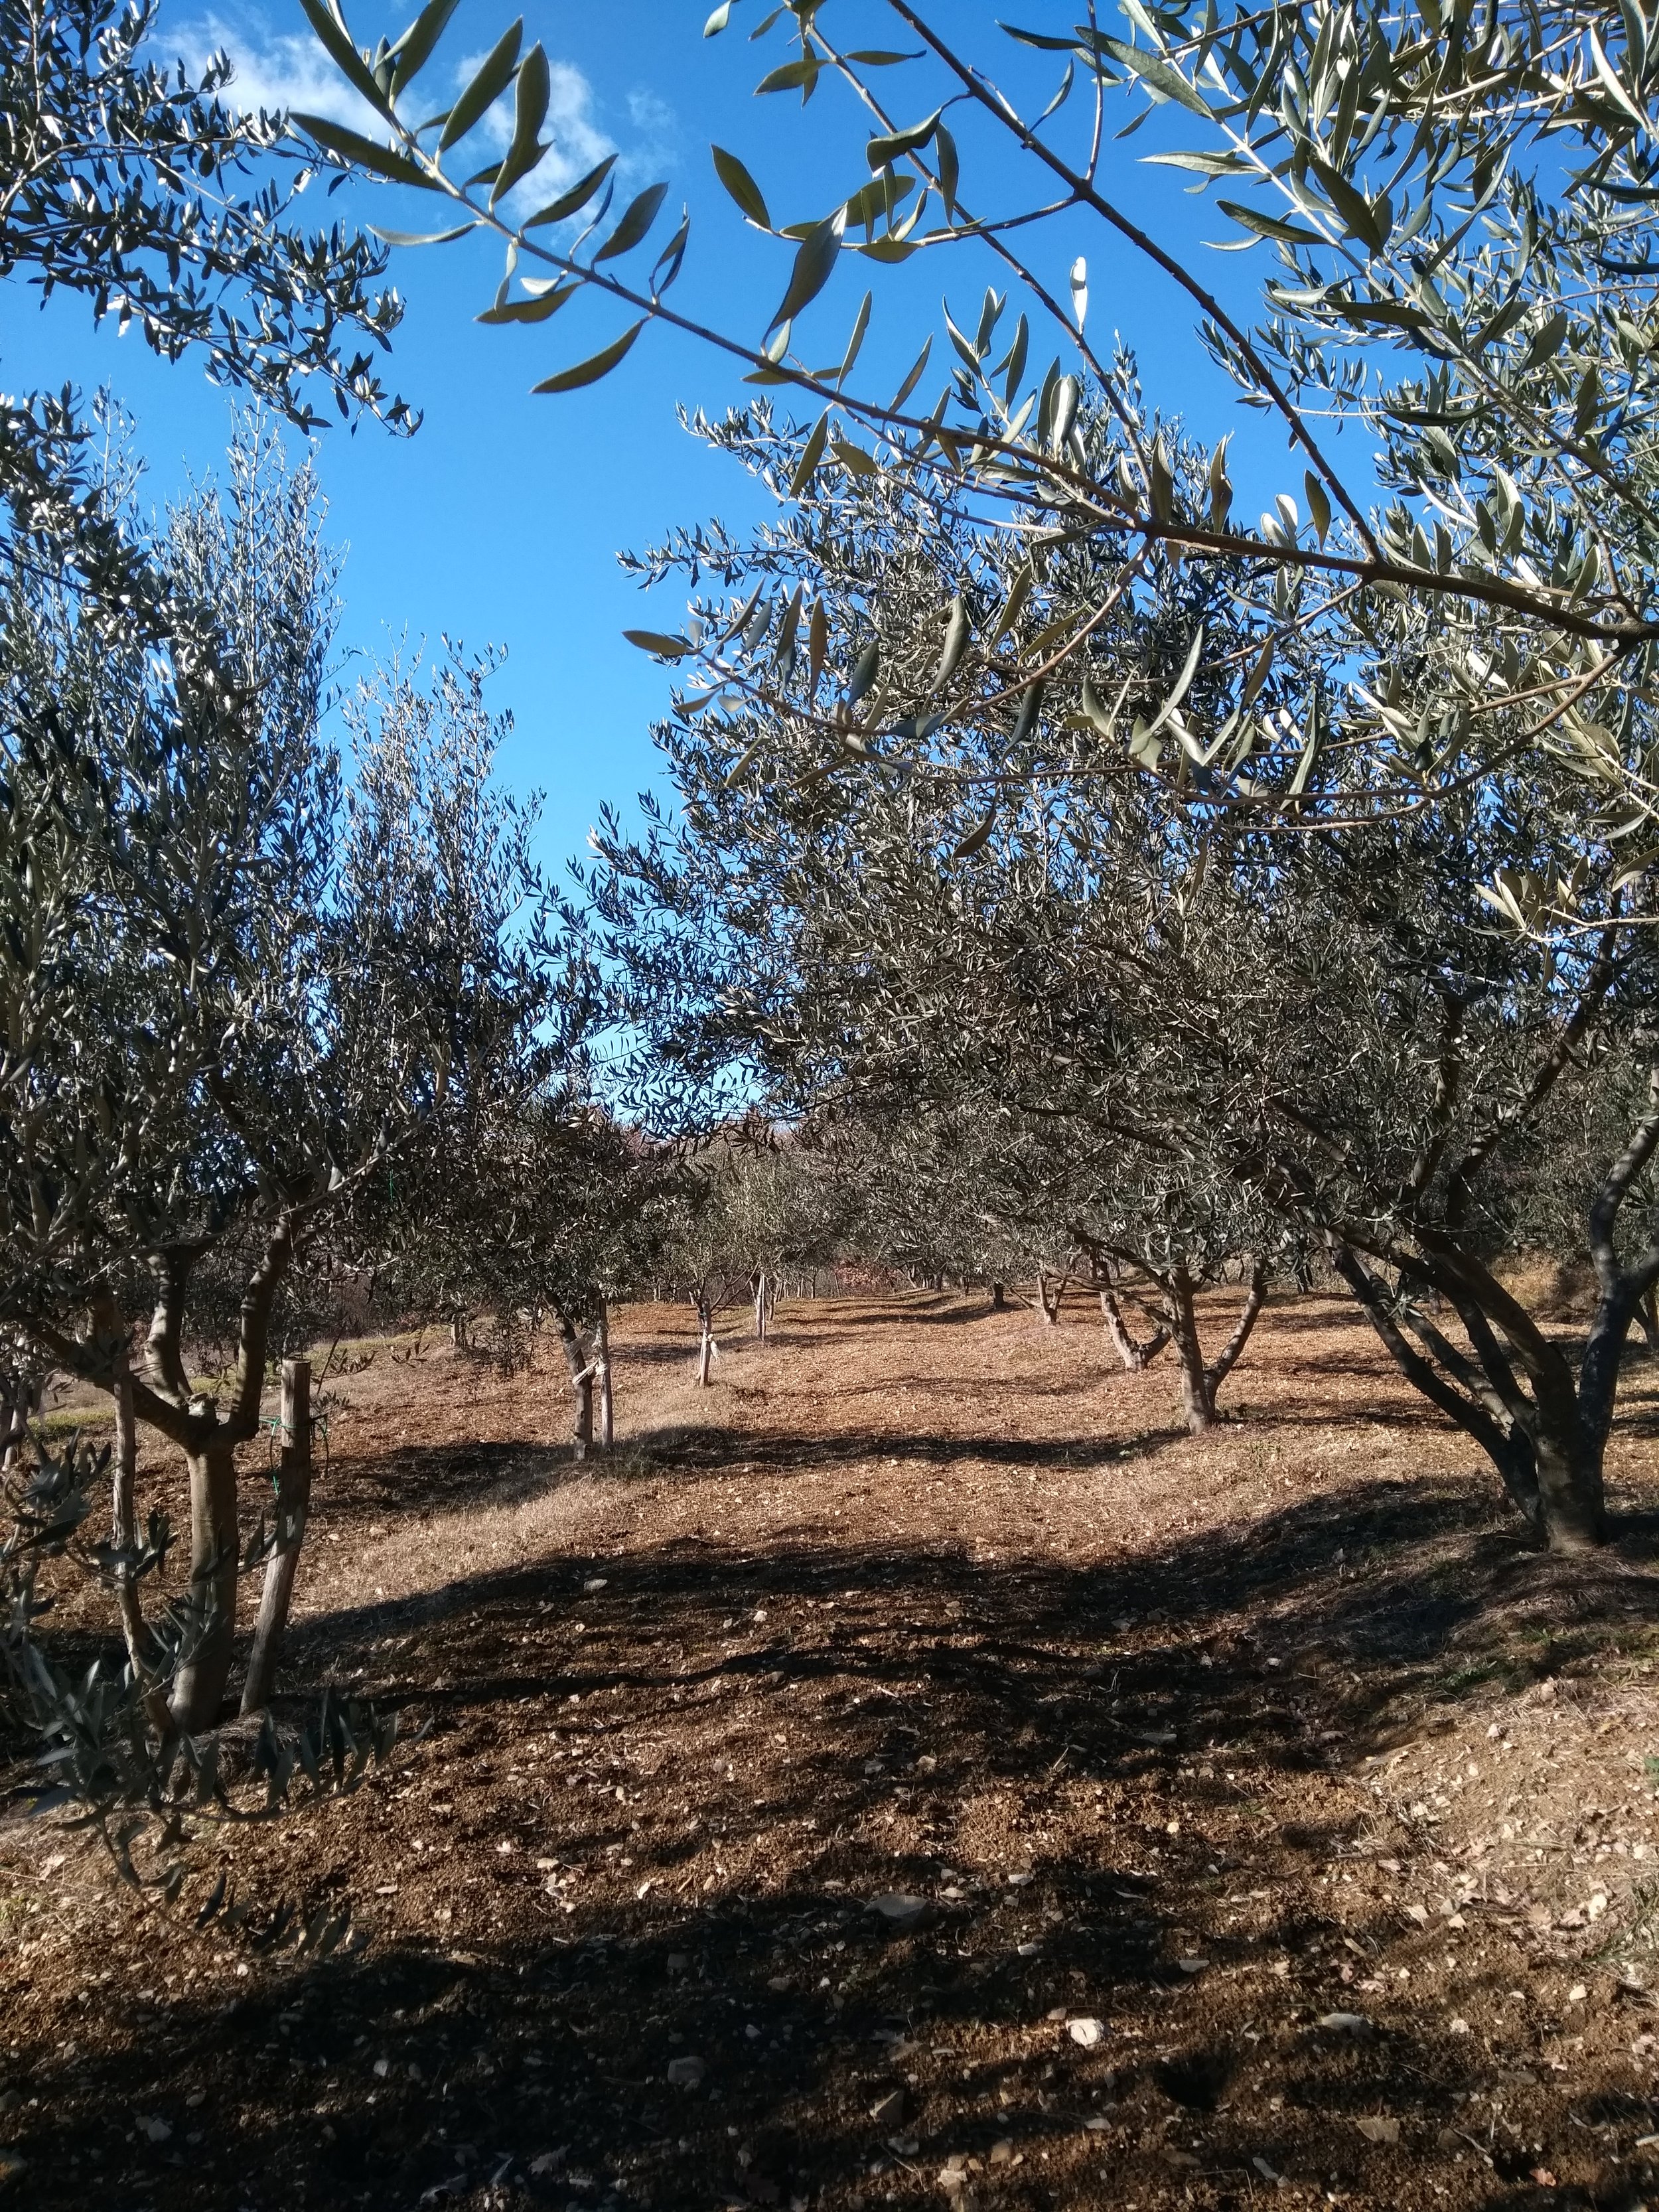 My parents' olive grove in Istria